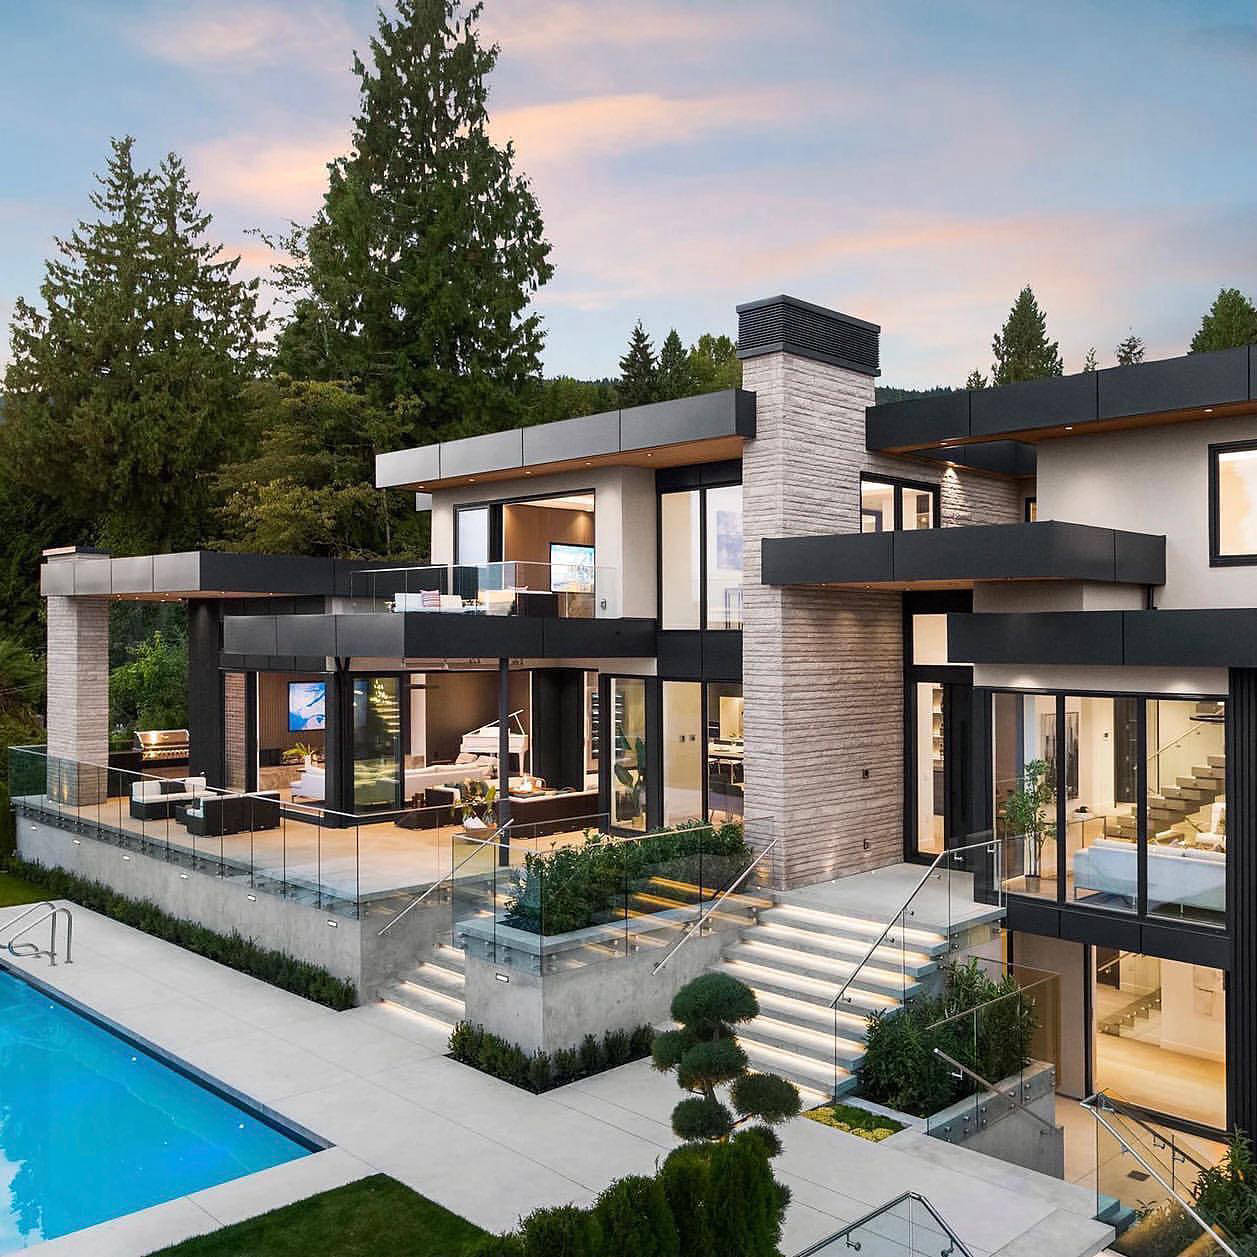 Millionaire Homes - Do you love modern houses as much as we do